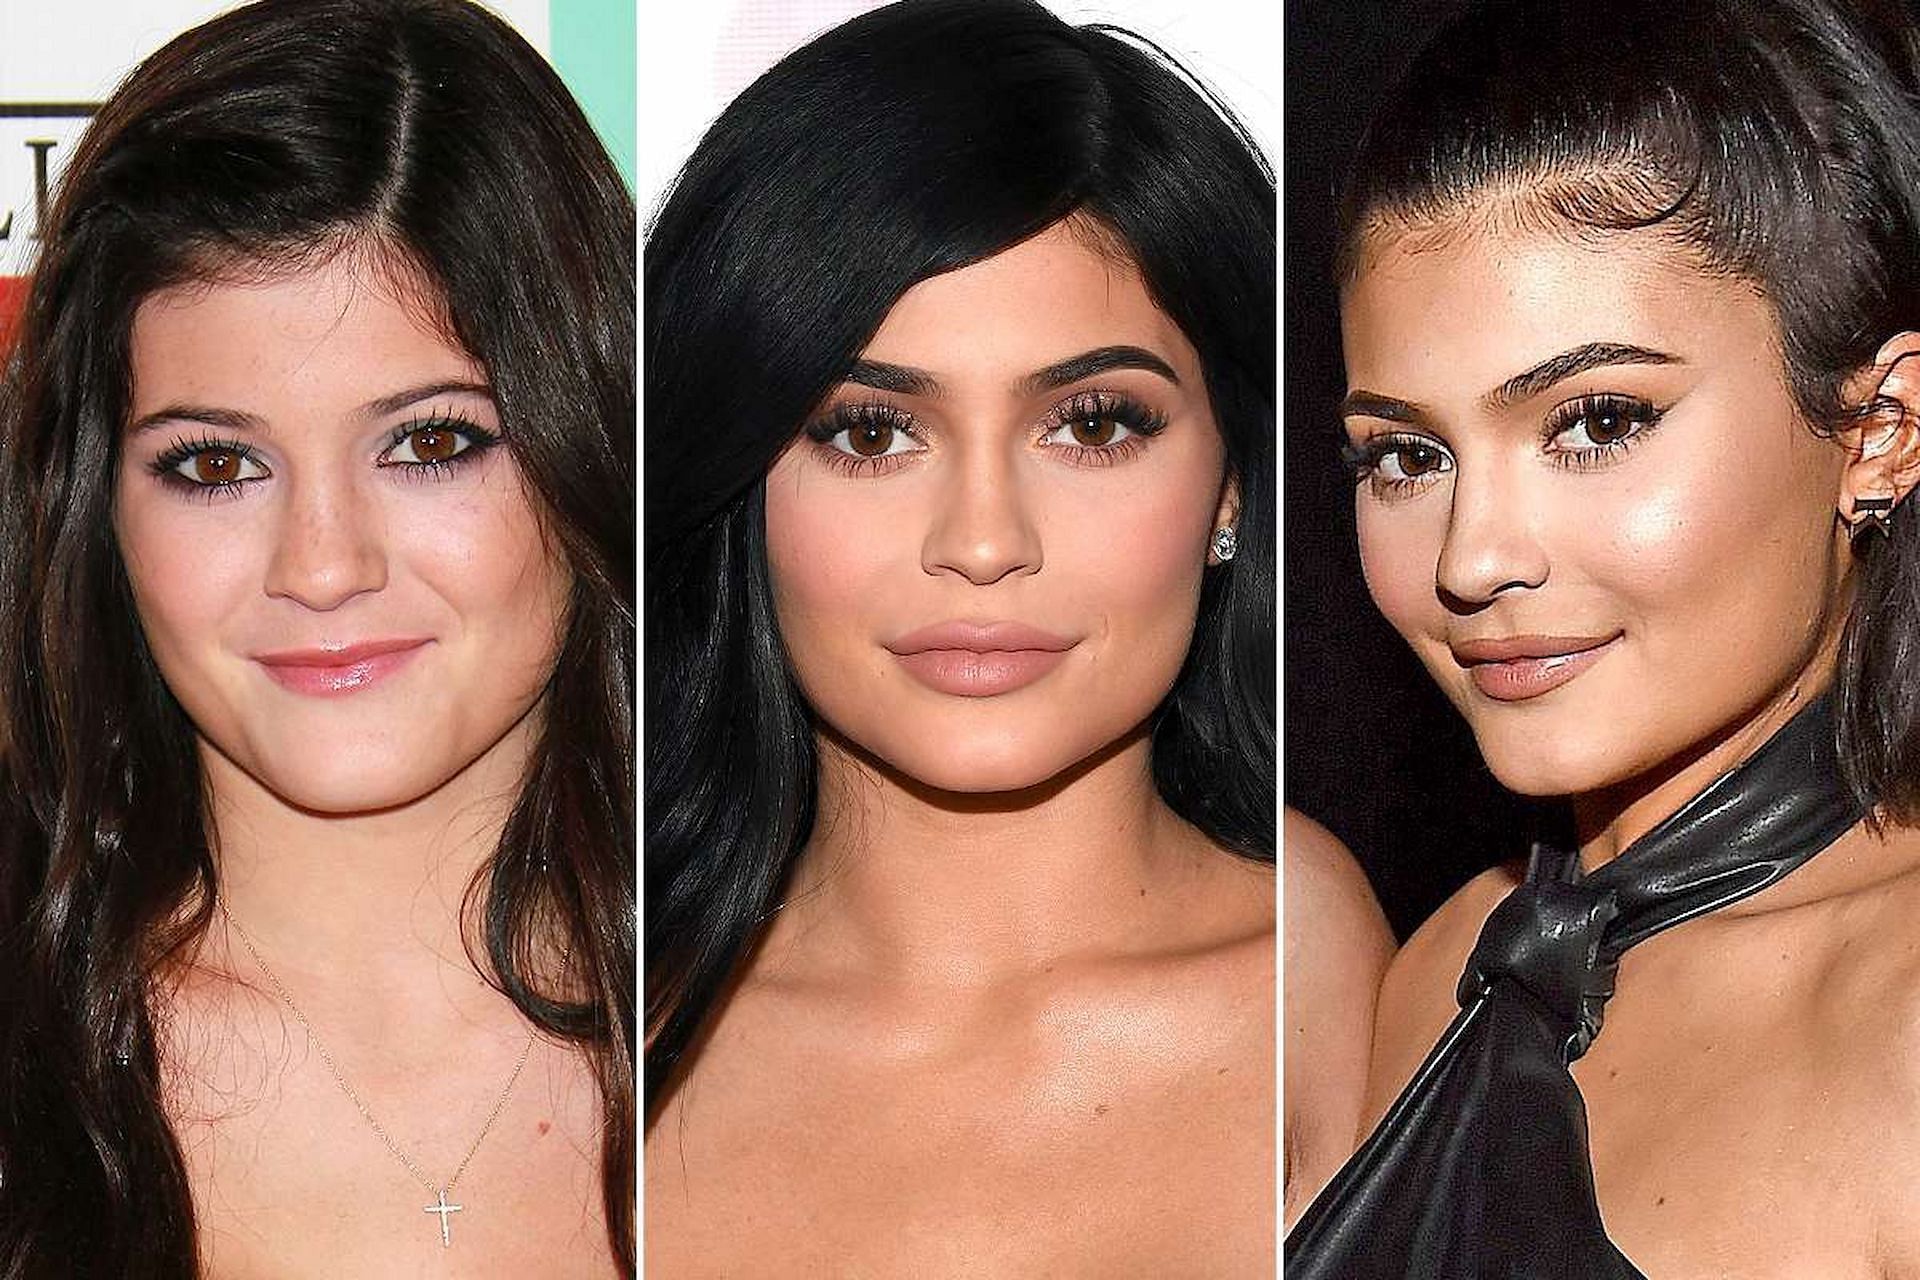 Over the years Kylie has received major backlash for surgically altering her face (Image via Getty)